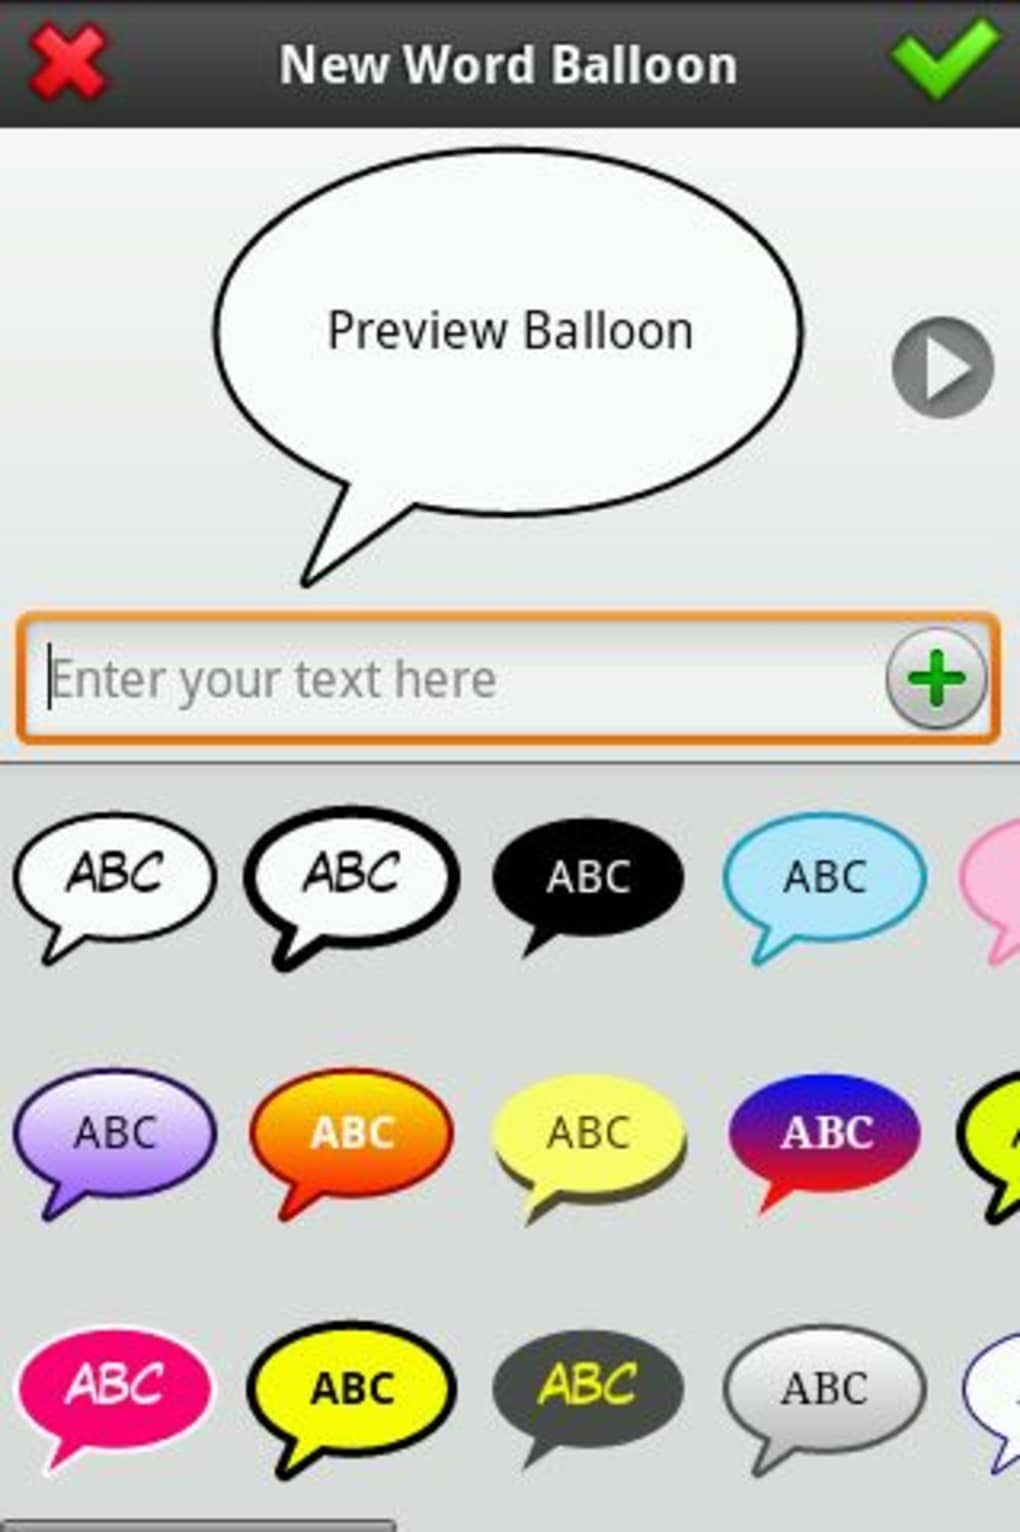 Picsay pro 1.8 apk free download for android